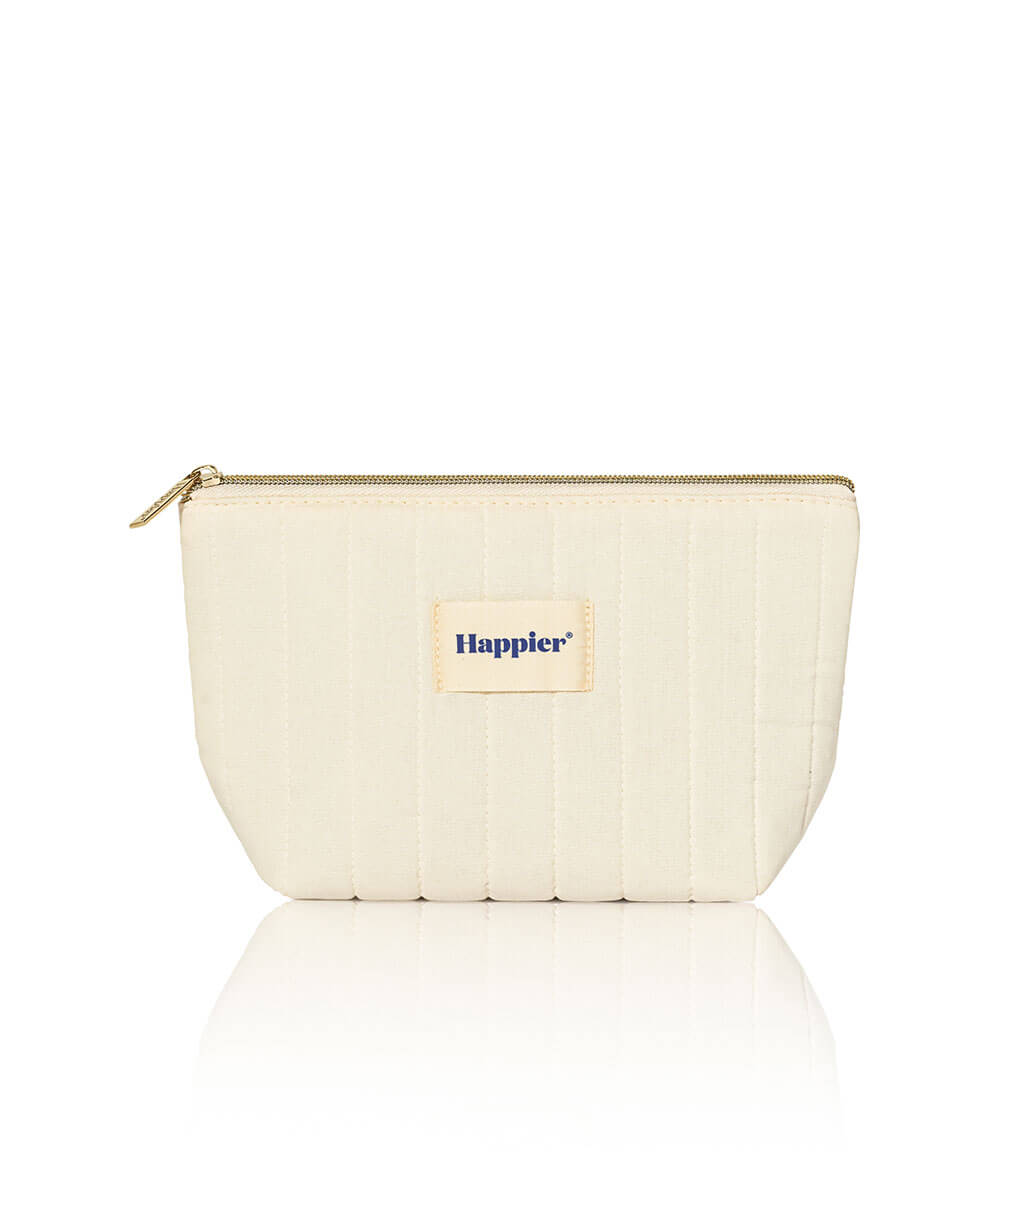 Happier Cosmetic Washbag, perfect for your beauty essentials.